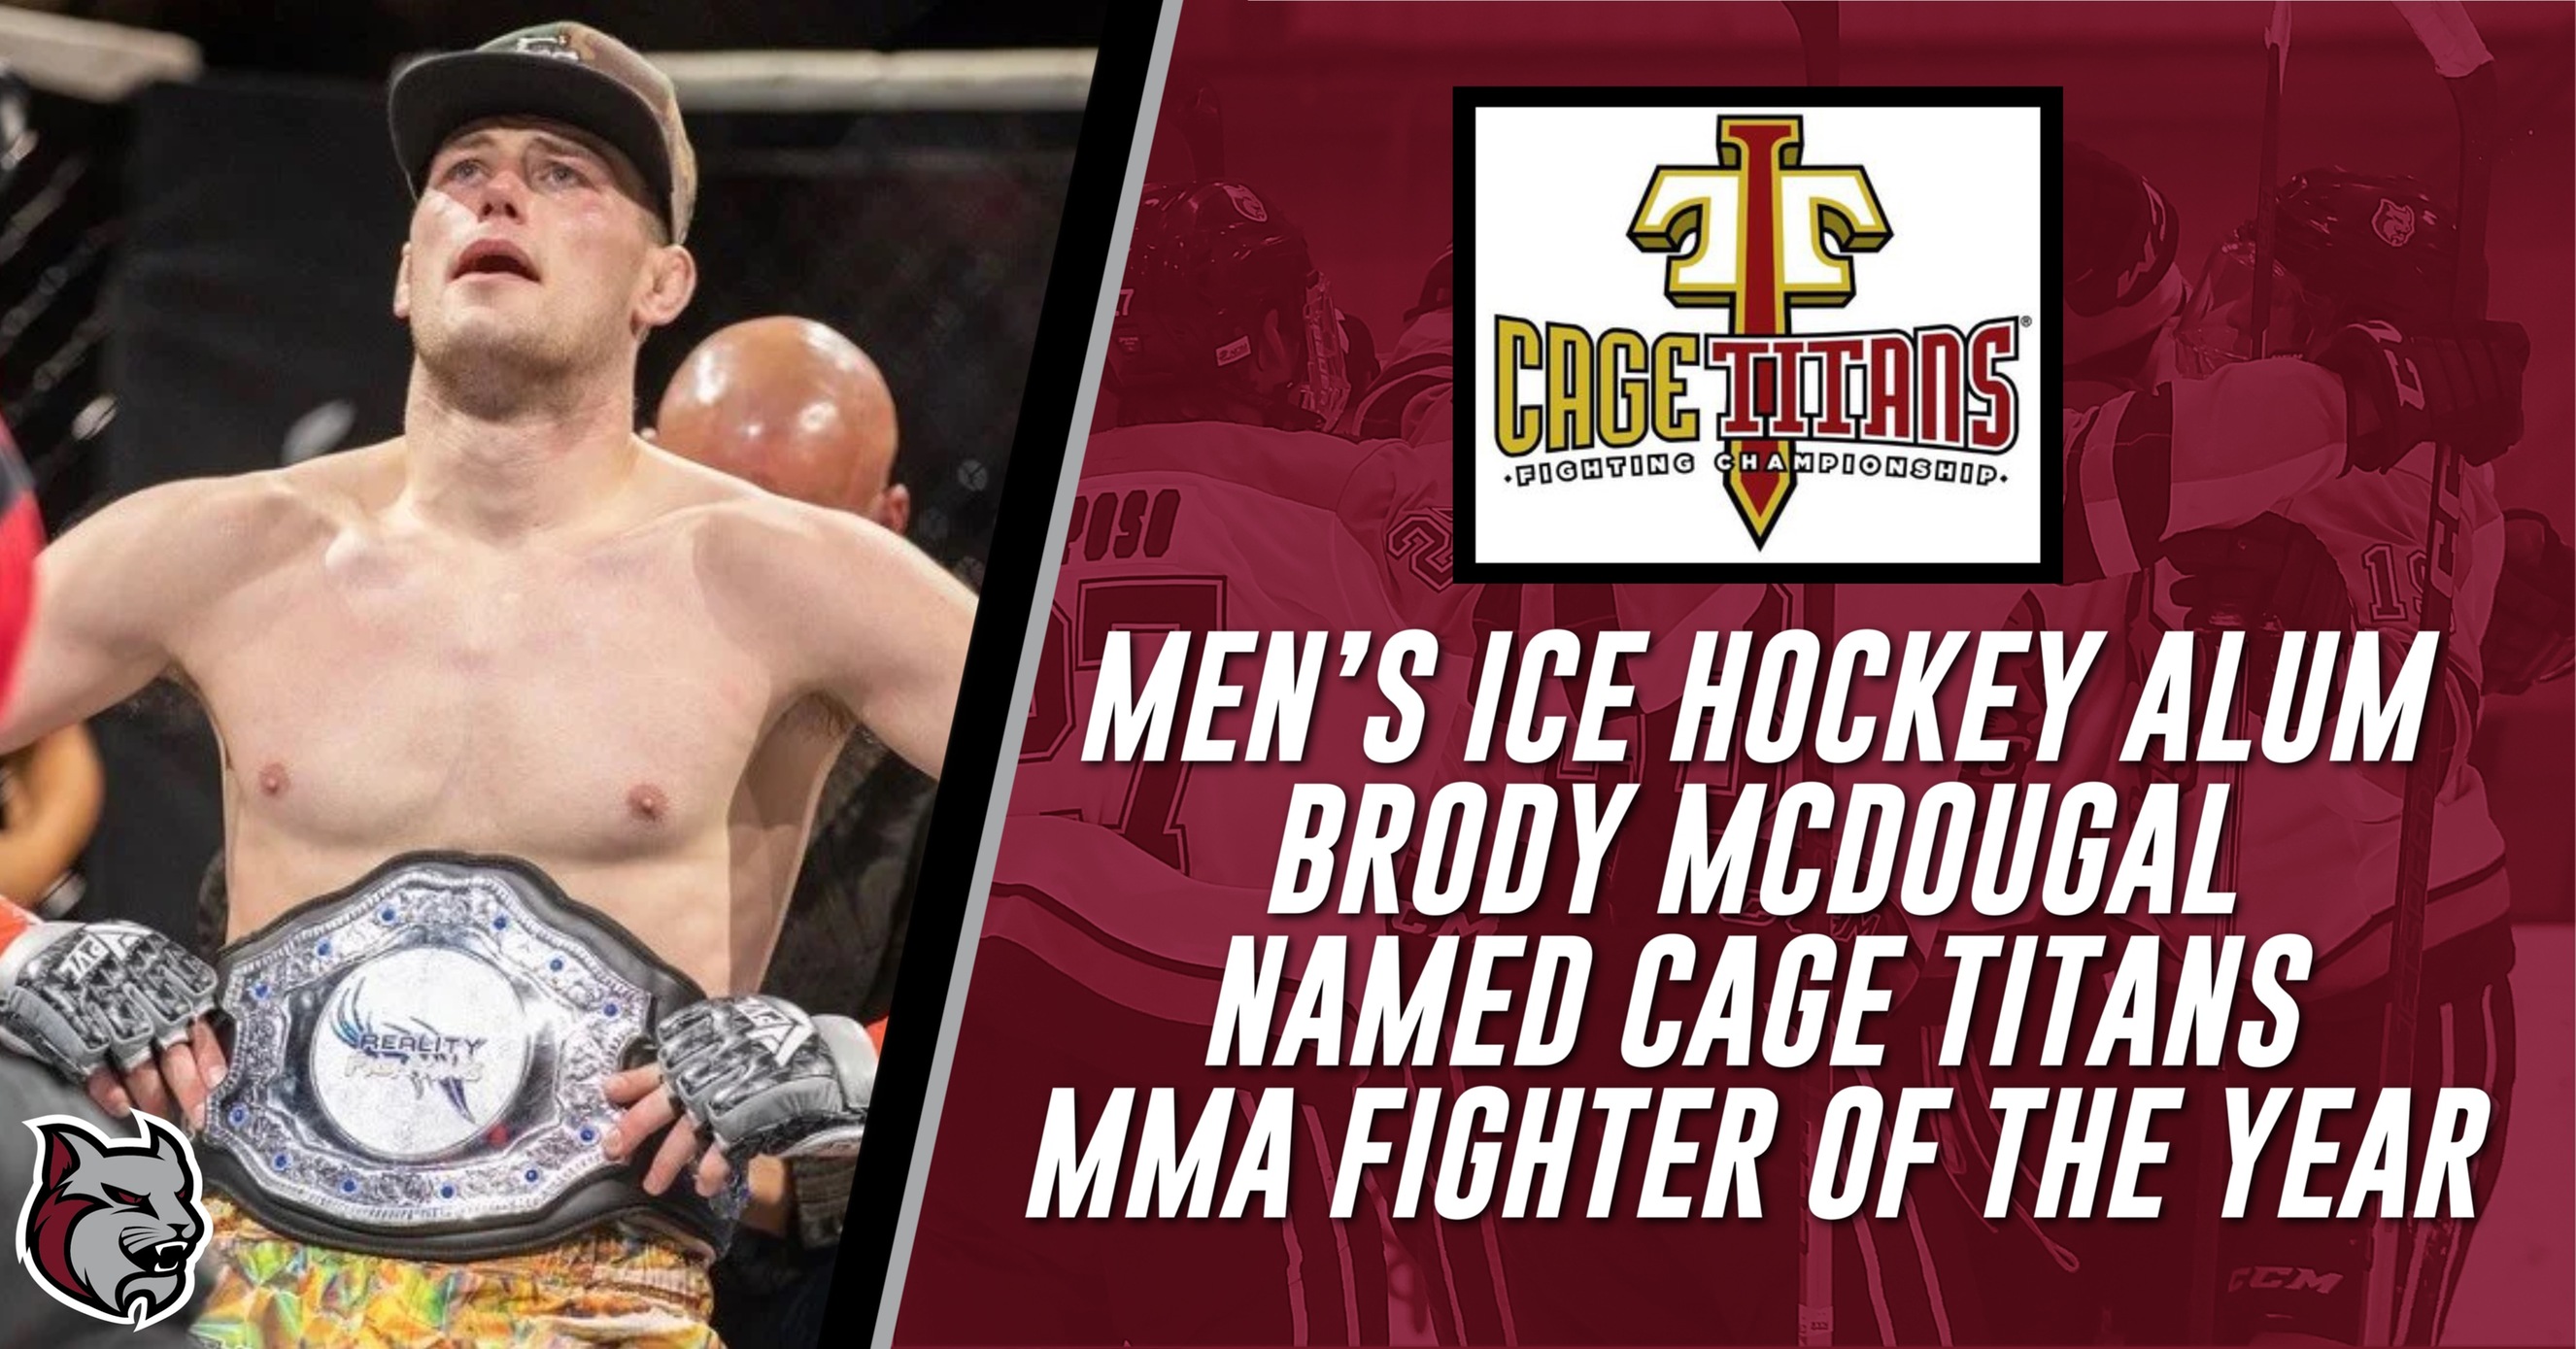 Men’s Ice Hockey Alum Brody McDougal Named Cage Titans MMA Fighter of the Year